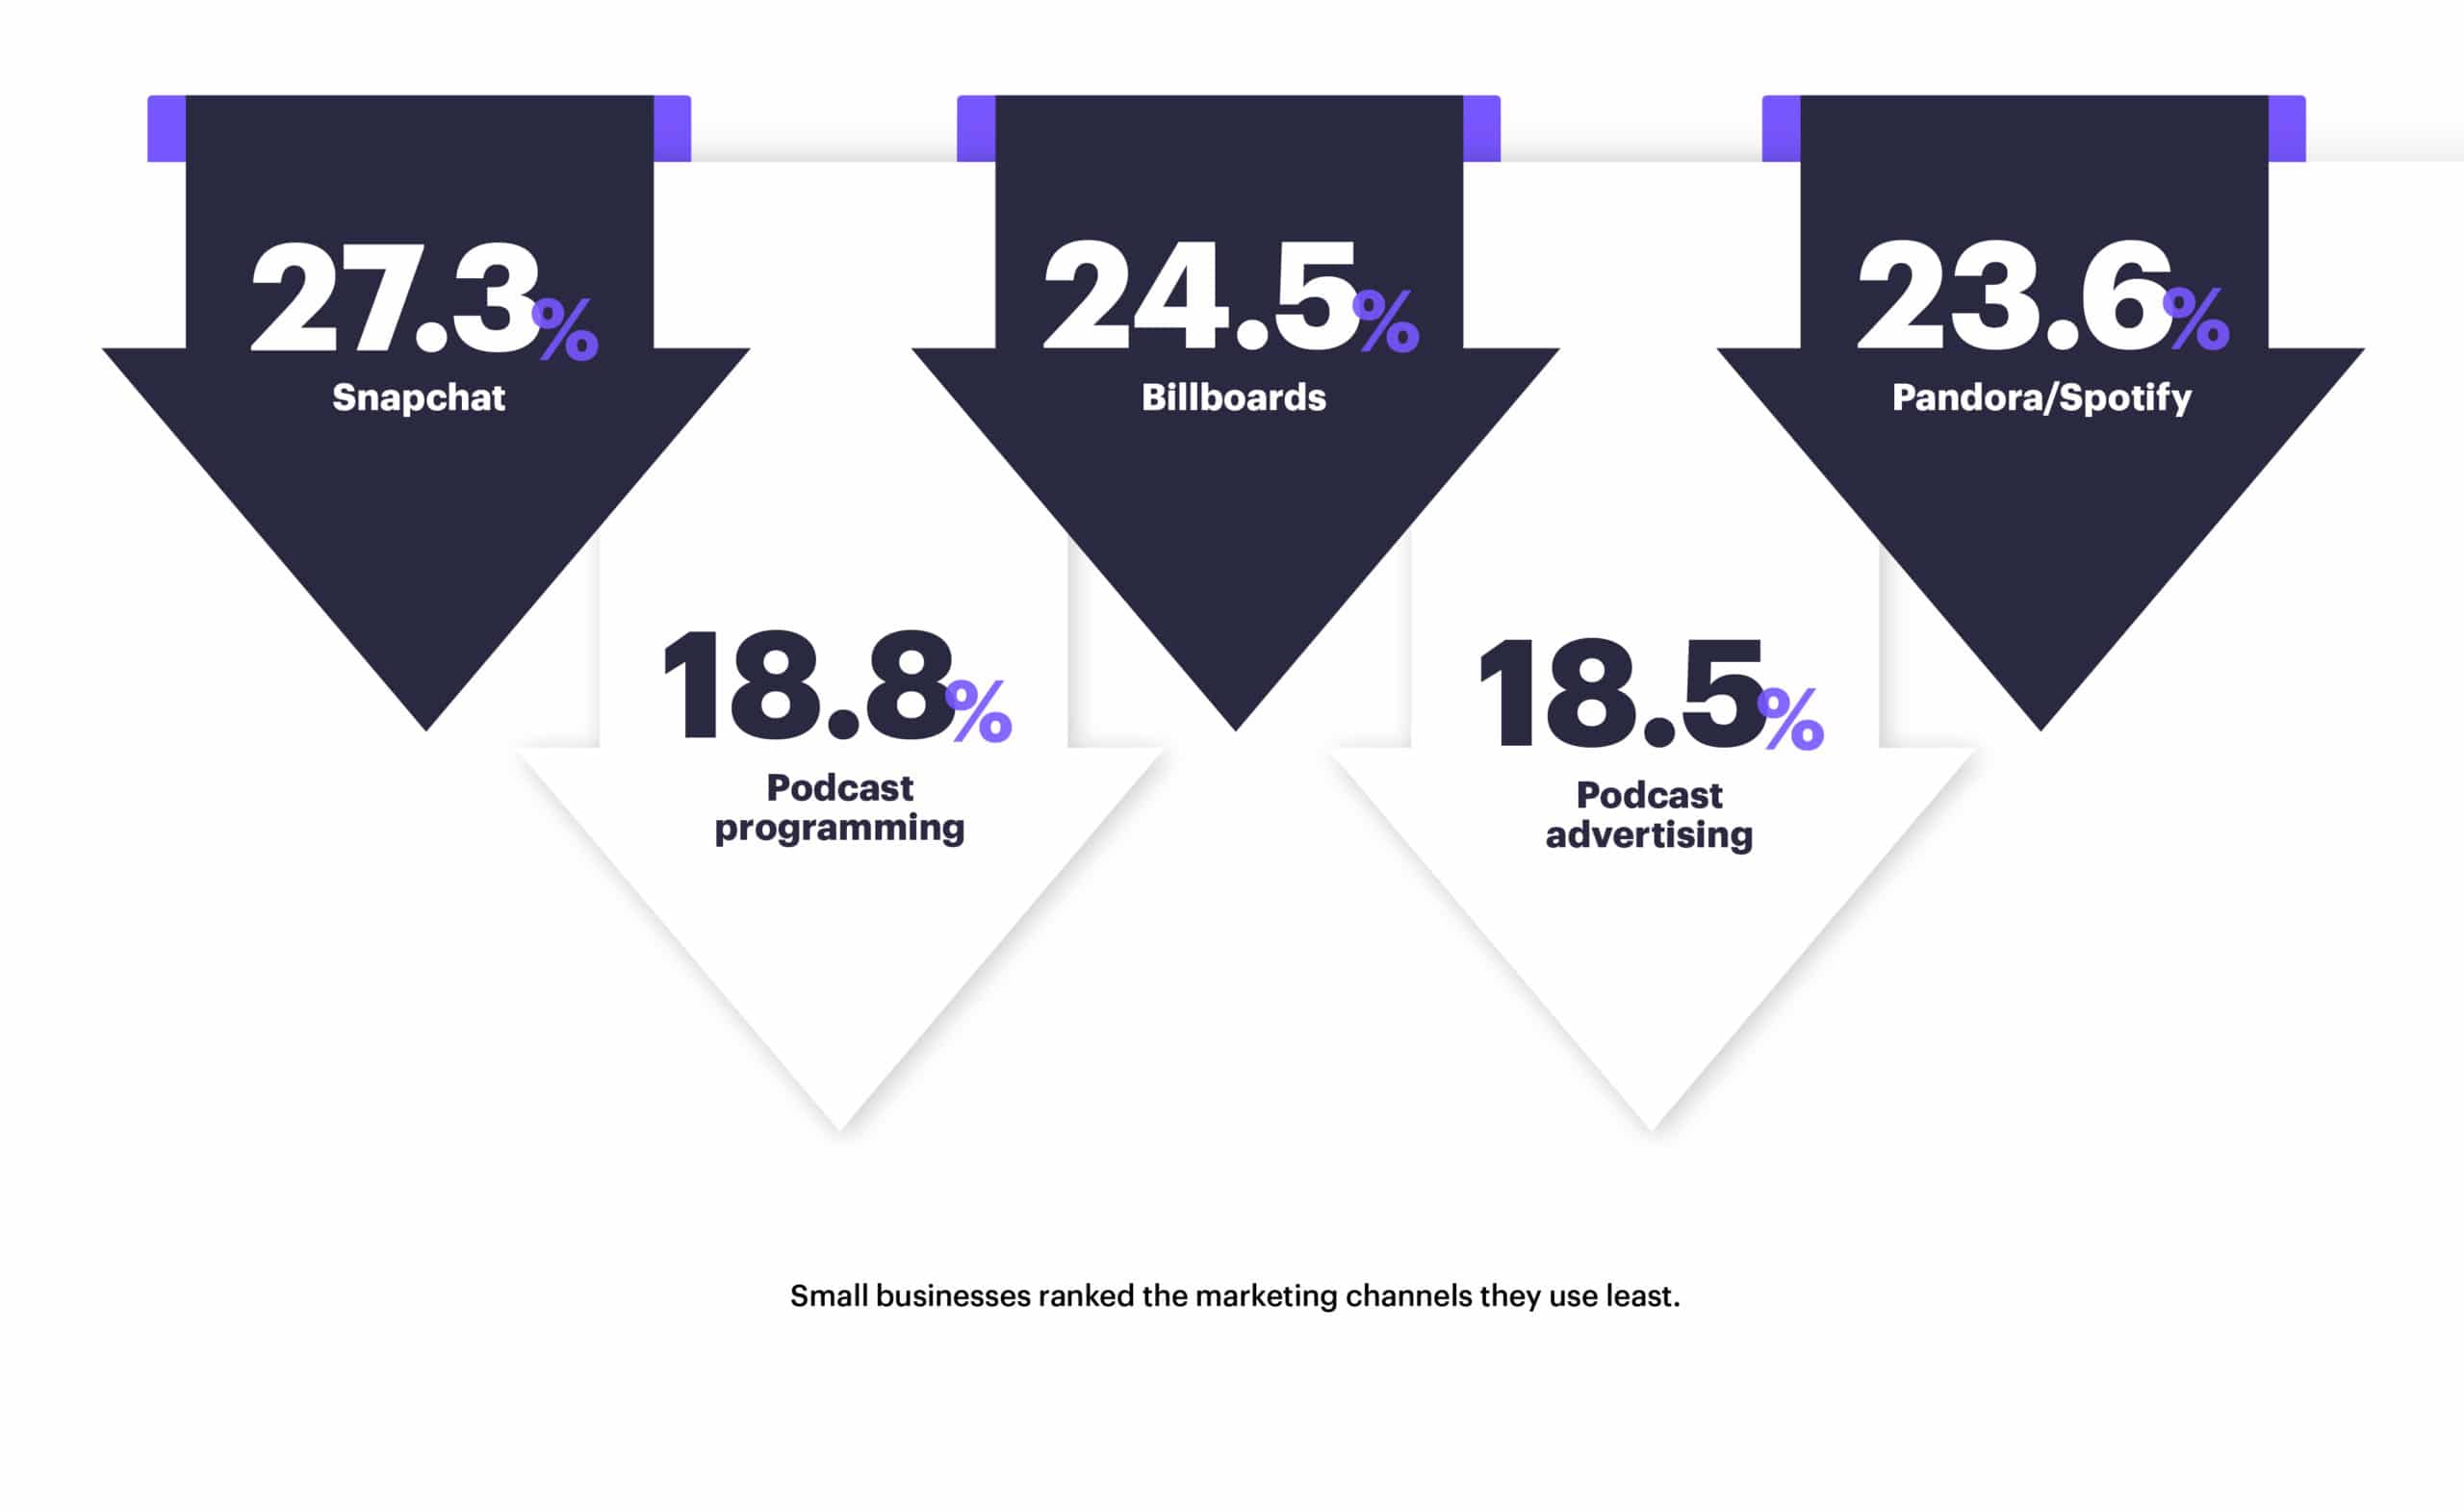 What are the least used marketing channels? This Campaign Monitor infographic shows the least used marketing channels by small businesses.